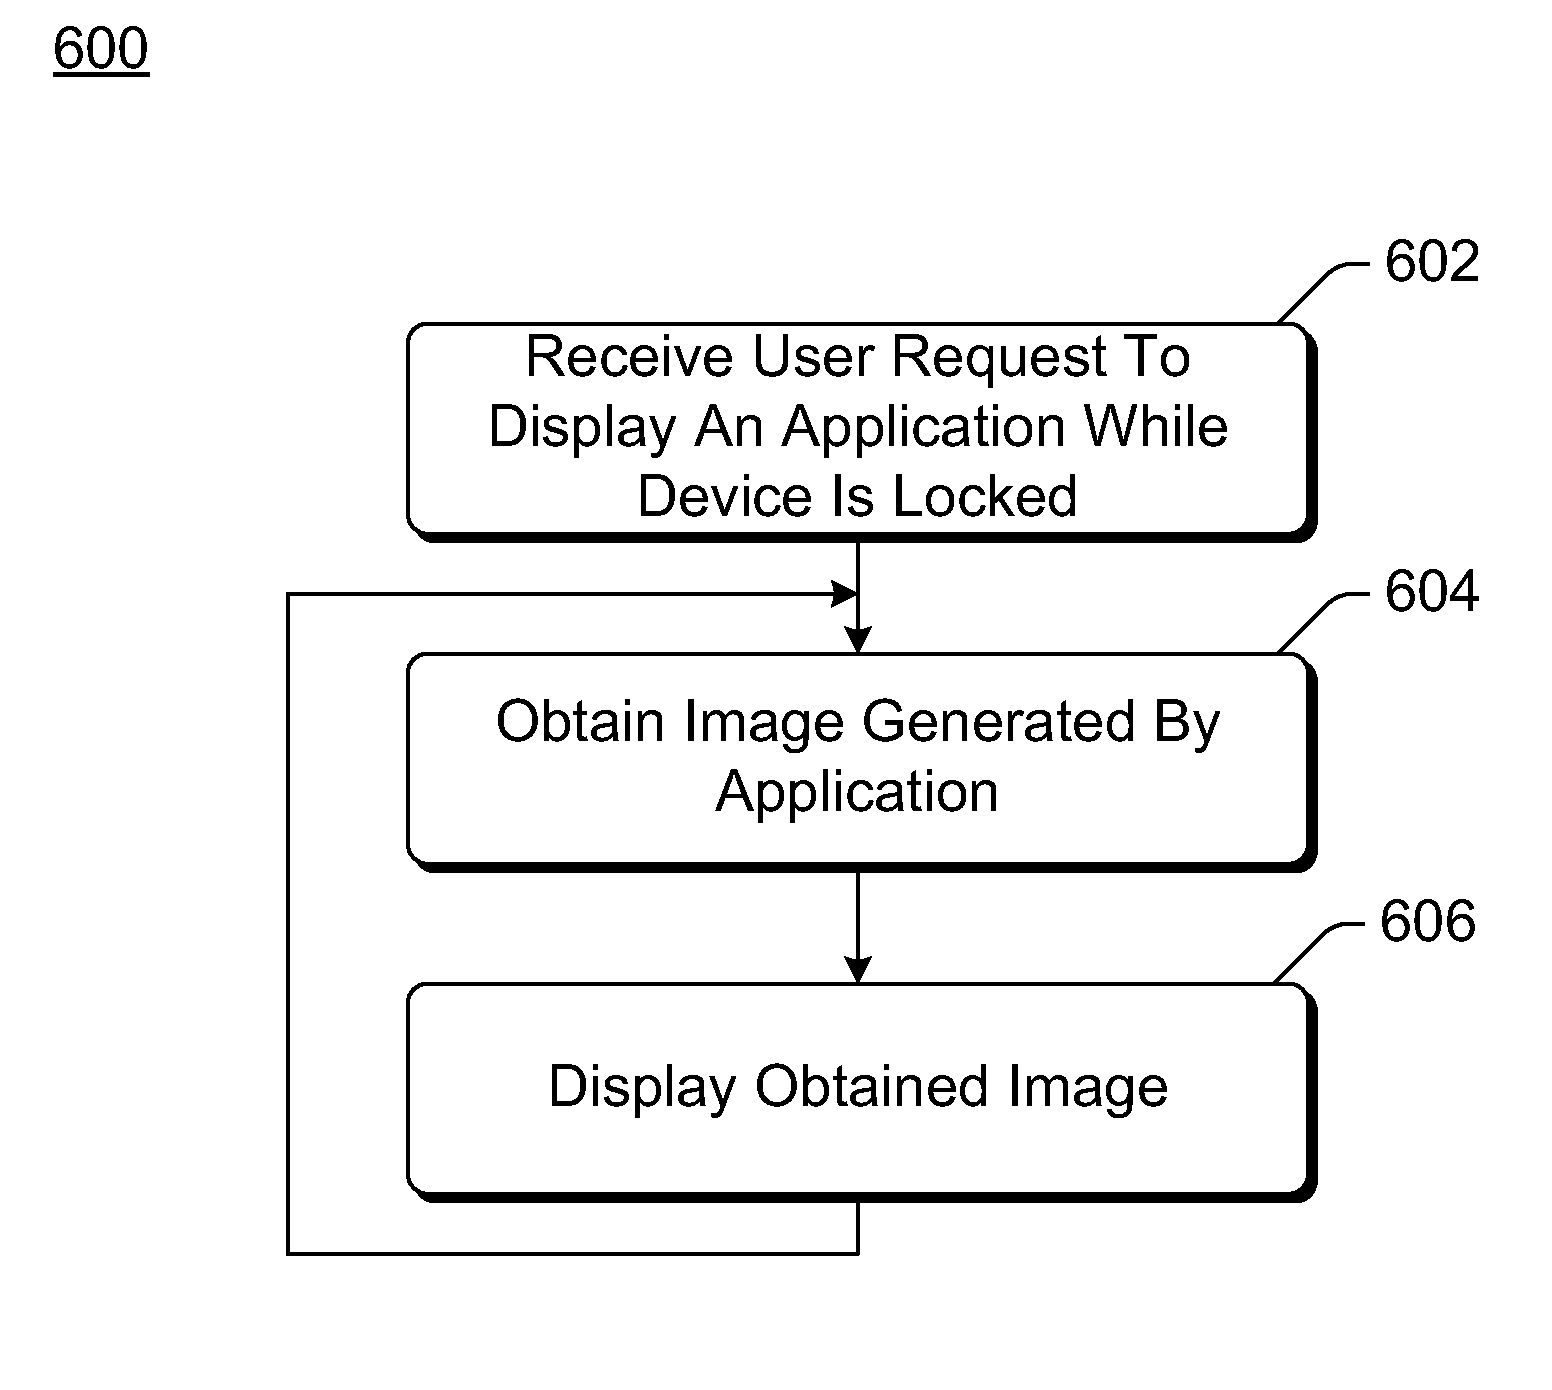 Application Display on a Locked Device